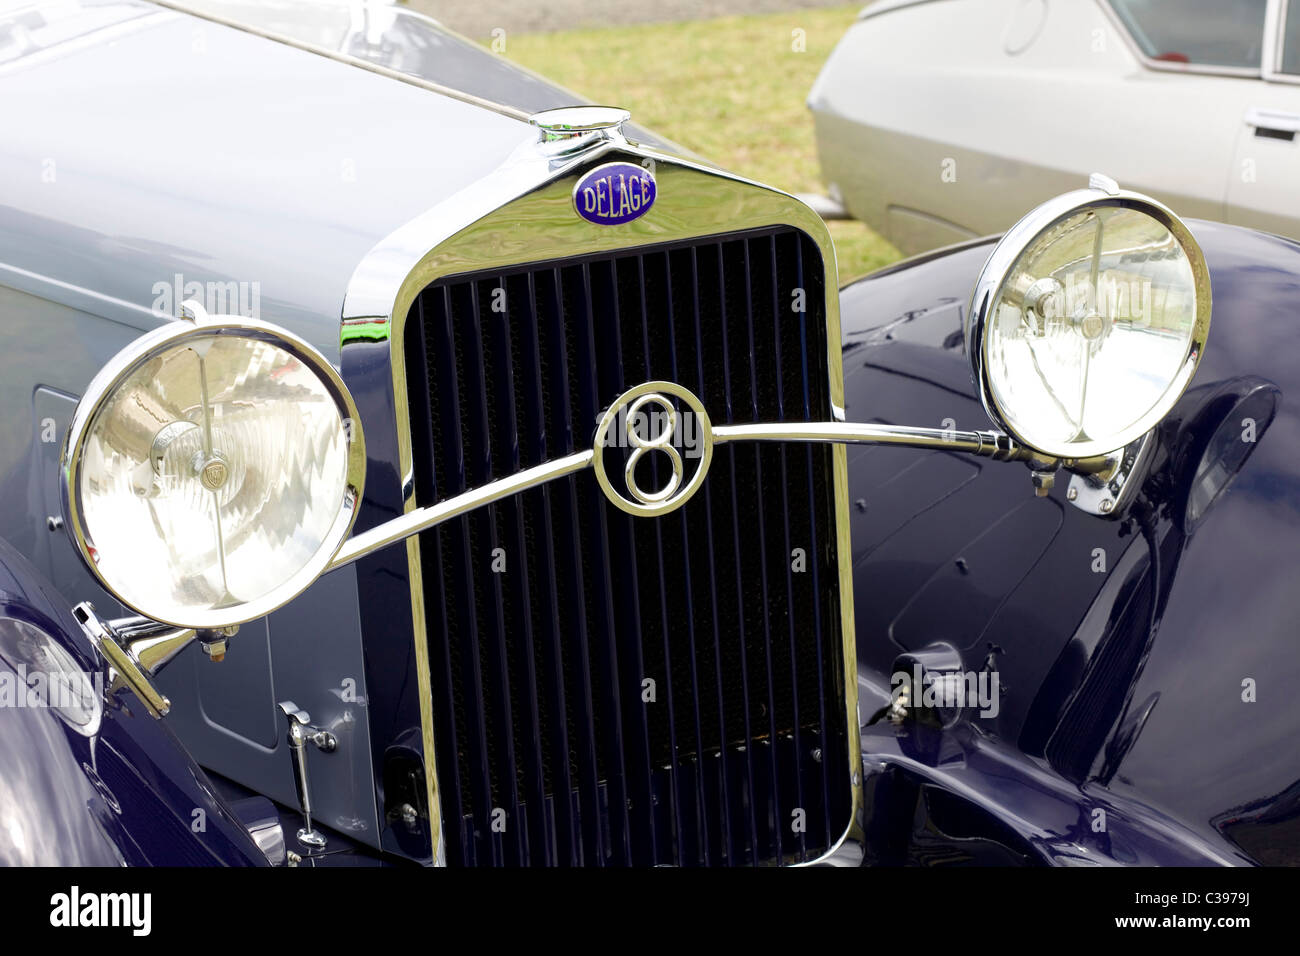 Radiator Grill & Headlights of a Delage Vintage car Stock Photo - Alamy